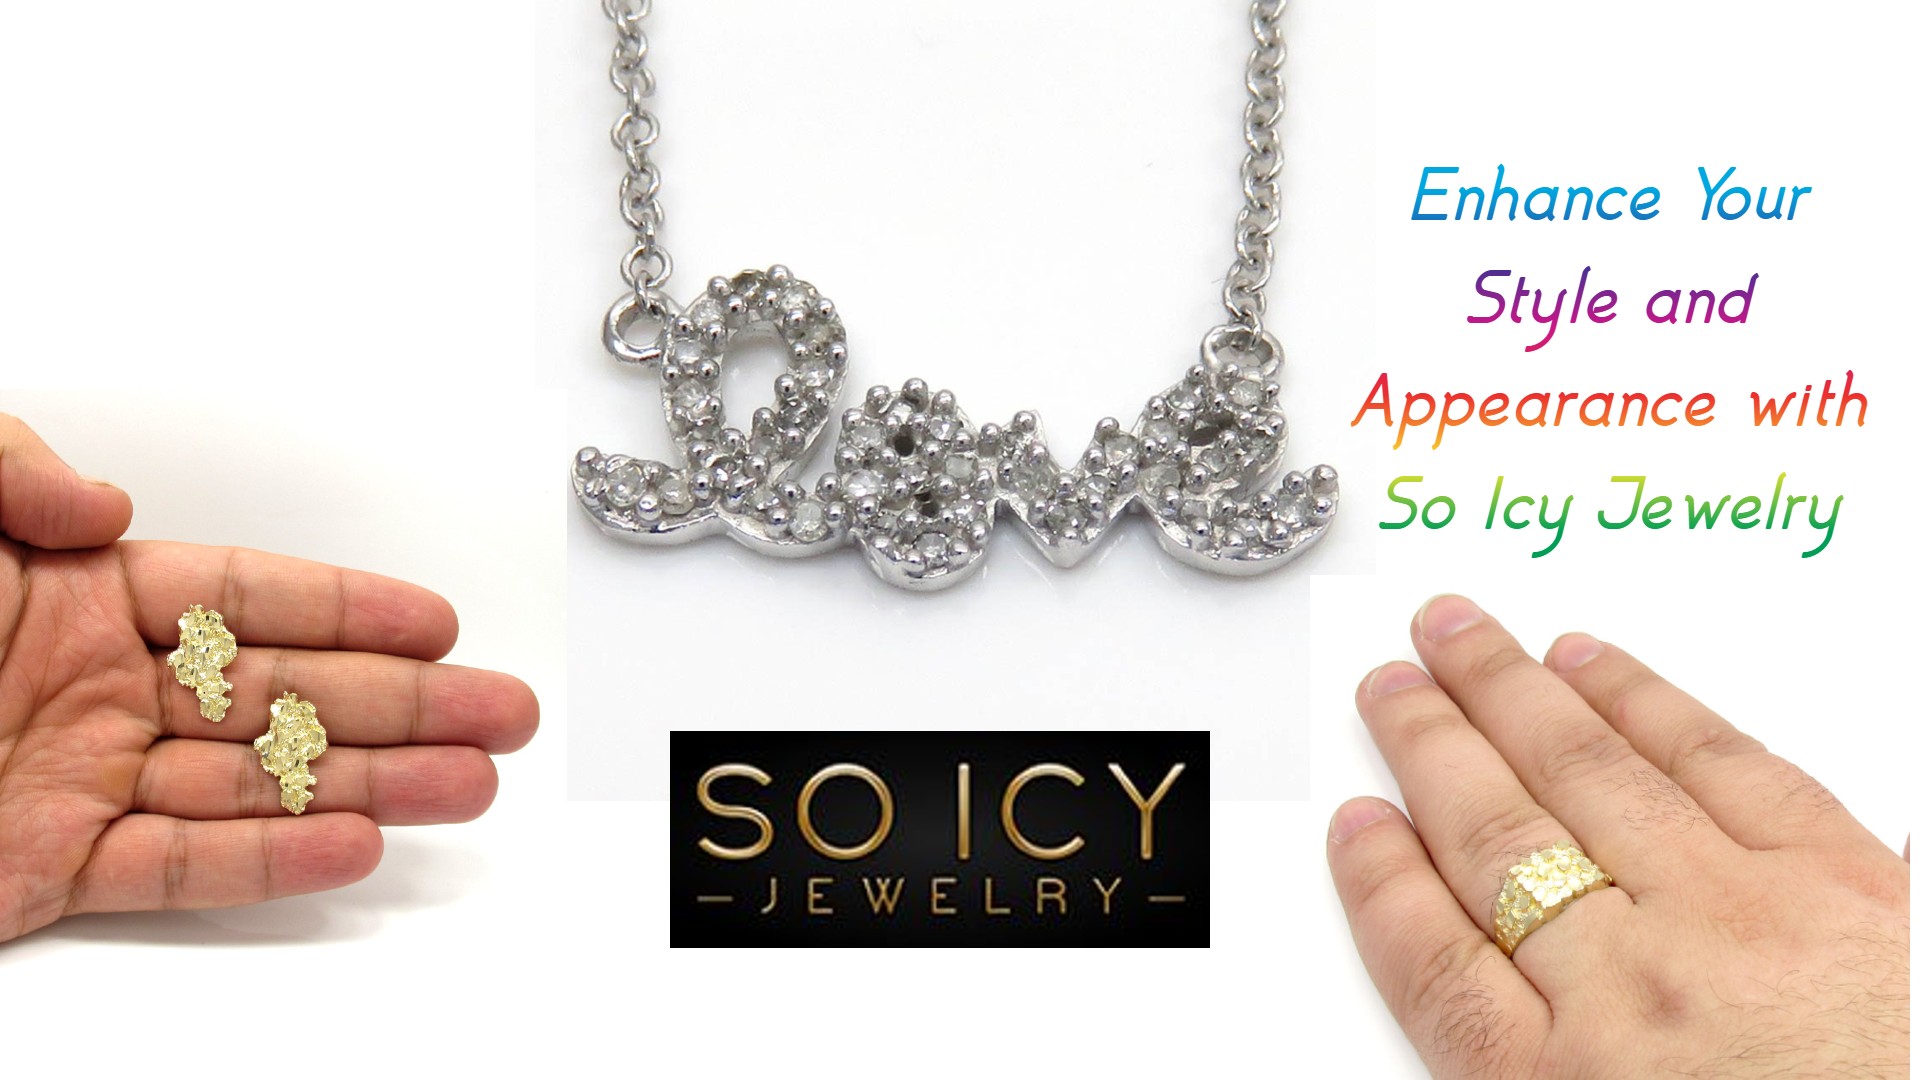 Enhance Your Style with So Icy Jewelry